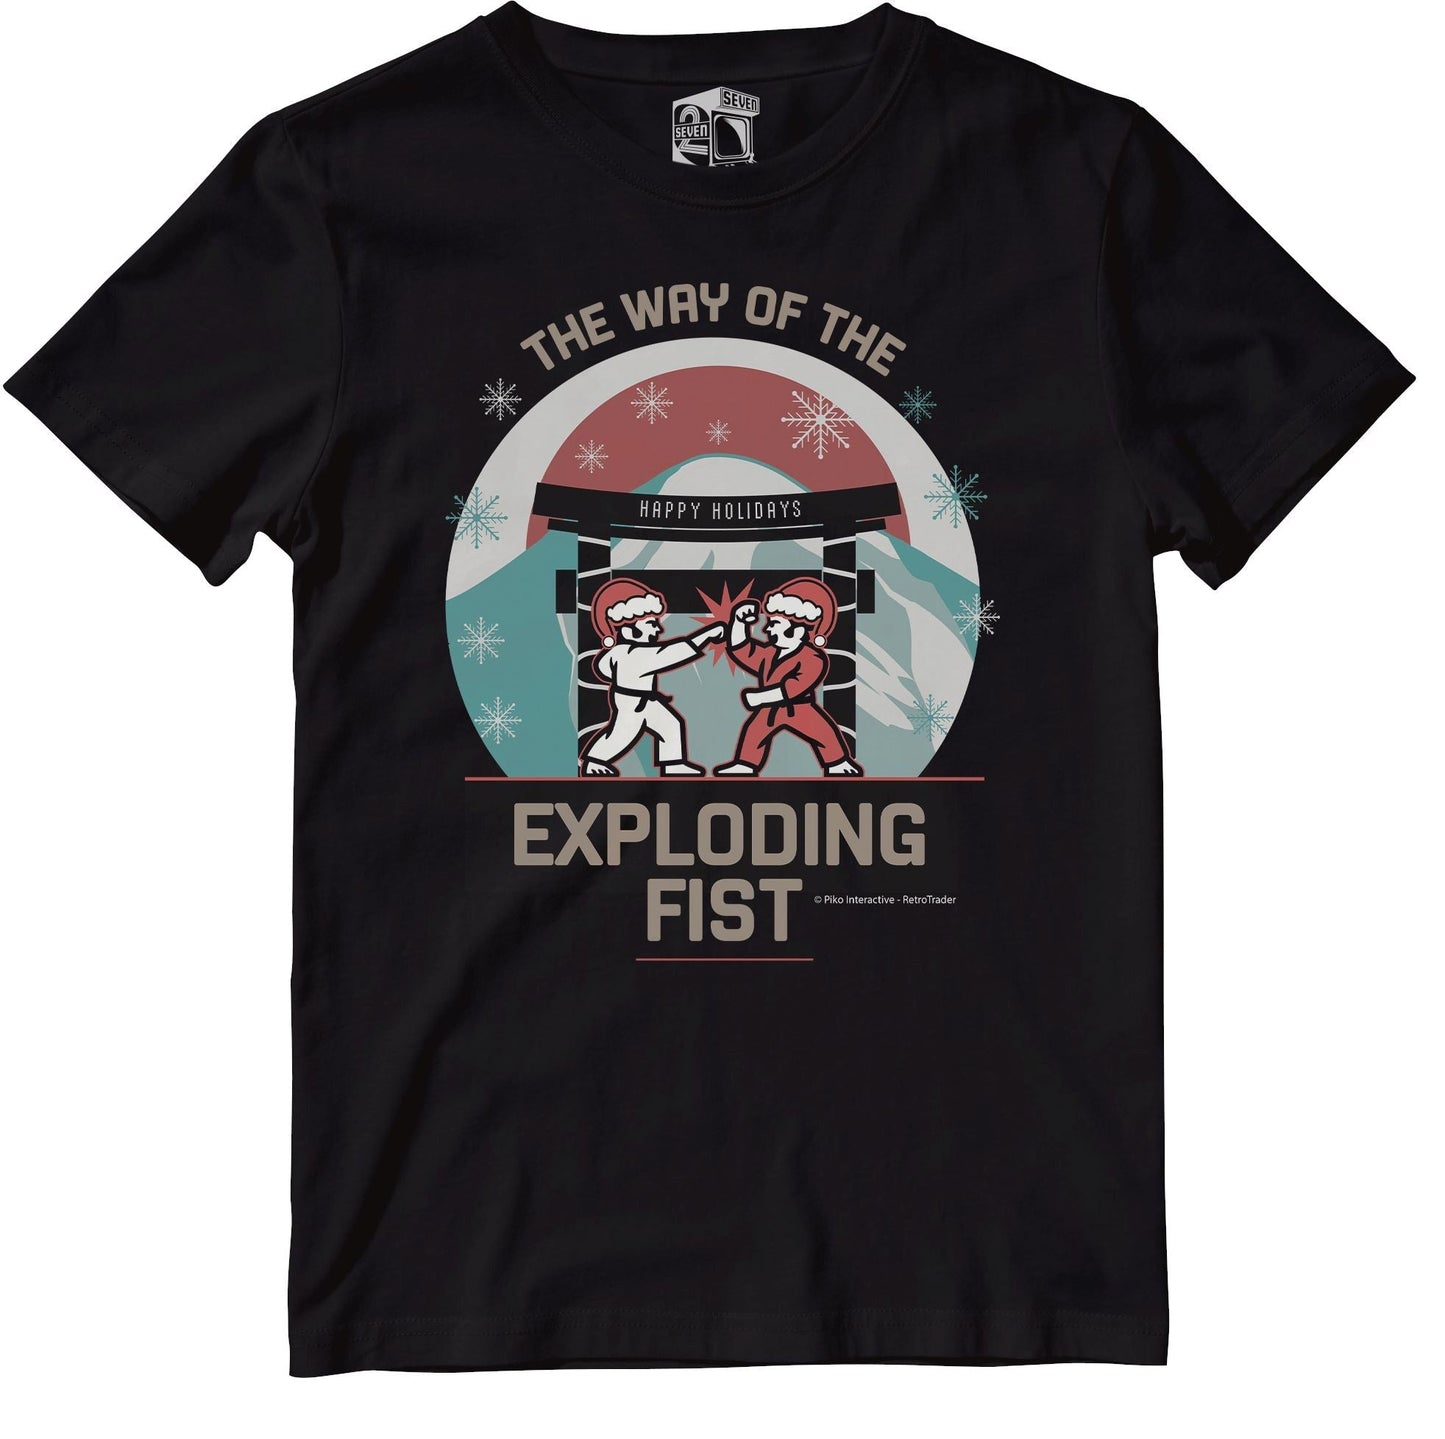 Way Of The Exploding Fist Christmas Ltd Edition Retro Gaming Kids T-Shirt Kids T-Shirt Seven Squared 3-4 Years Black 